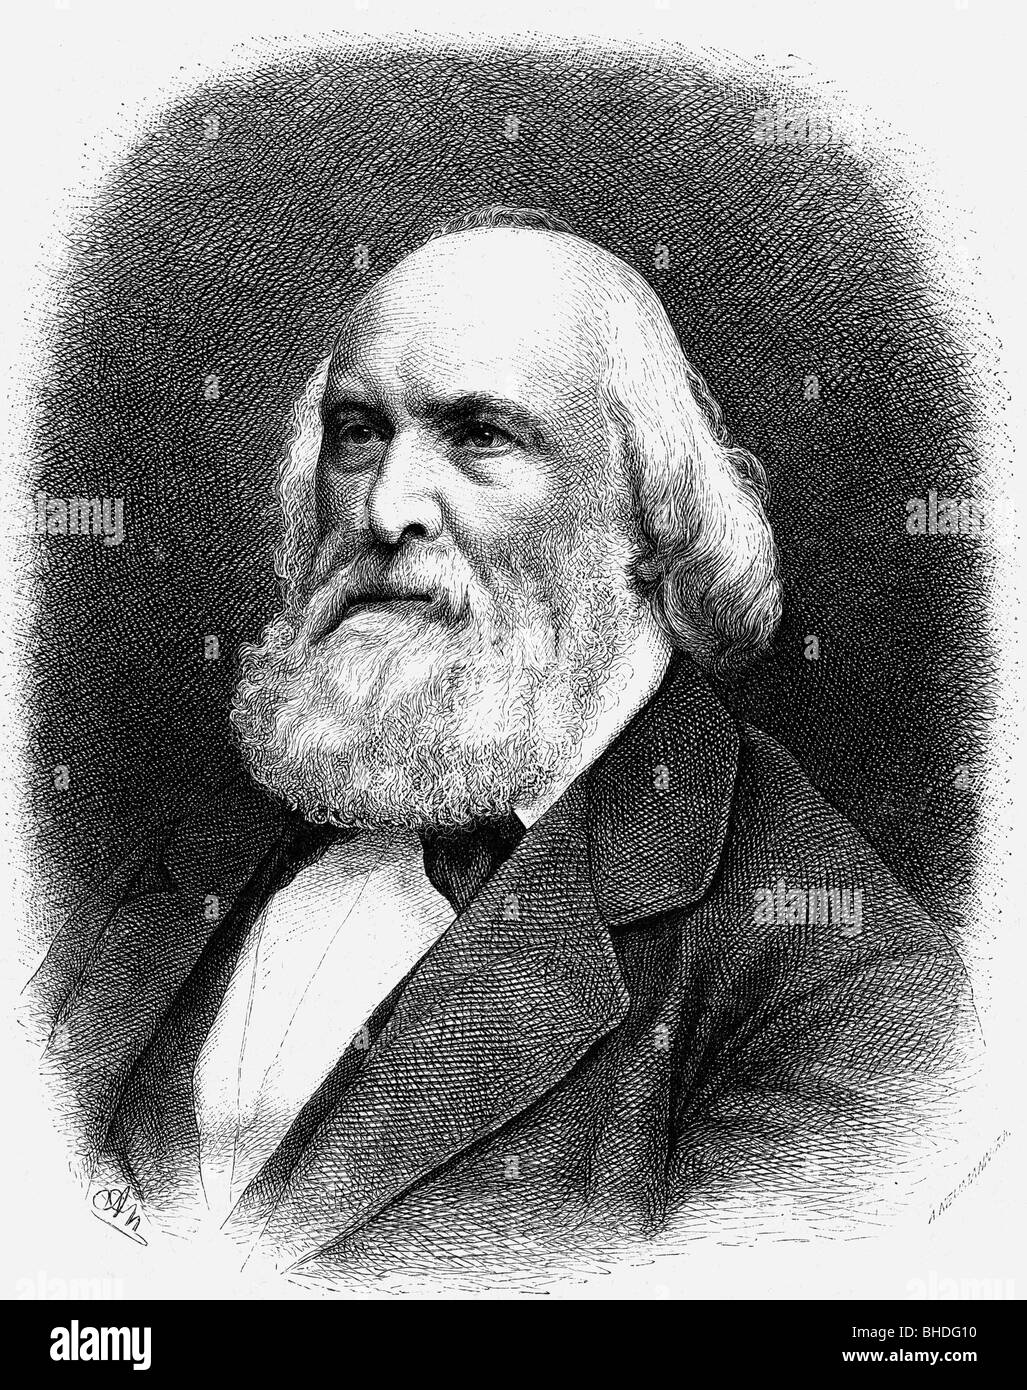 Kinkel, Johann Gottfried, 11.8.1815 - 13.11.1882, German author / writer and art historian, portrait, after photography by Louis Zipfel, wood engraving by Adolf Neumann, 19th century, Stock Photo